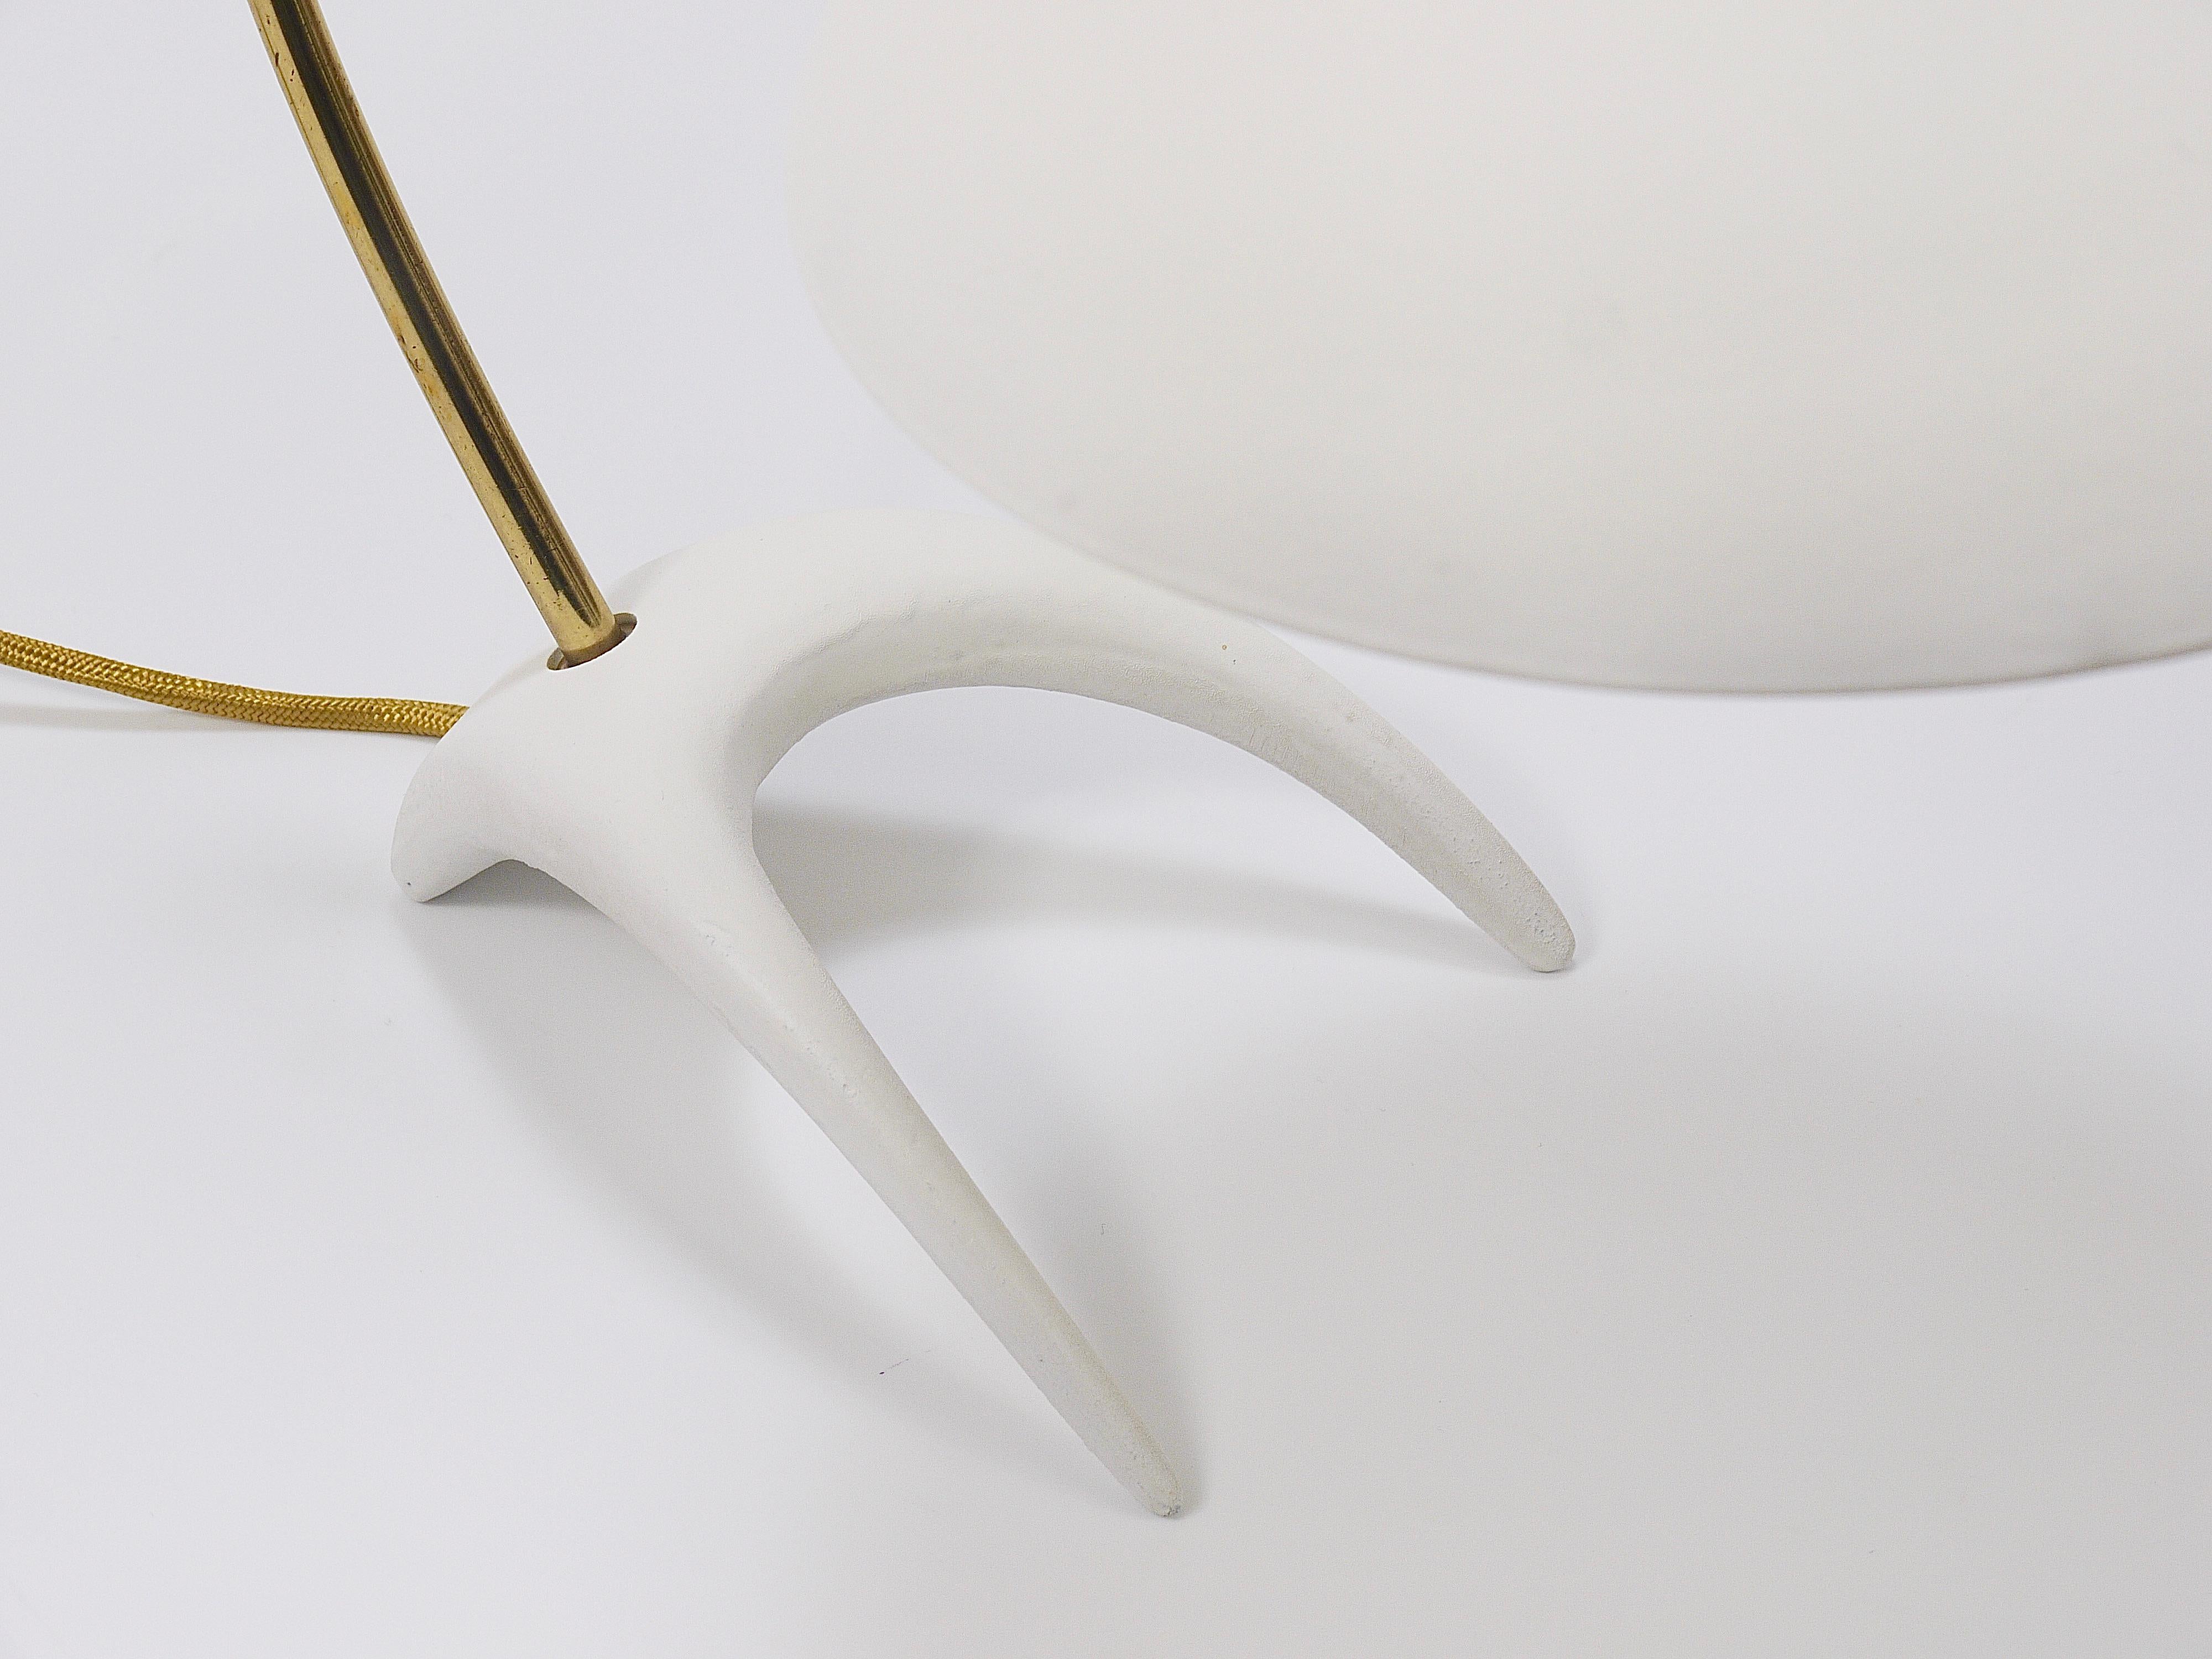 A elegant Mid-Century modern Stilnovo-Style „Crowfoot“ table / side or desk lamp from the 1950s. Designed by Karl-Heinz Kinsky, executed by the German manufacturer 